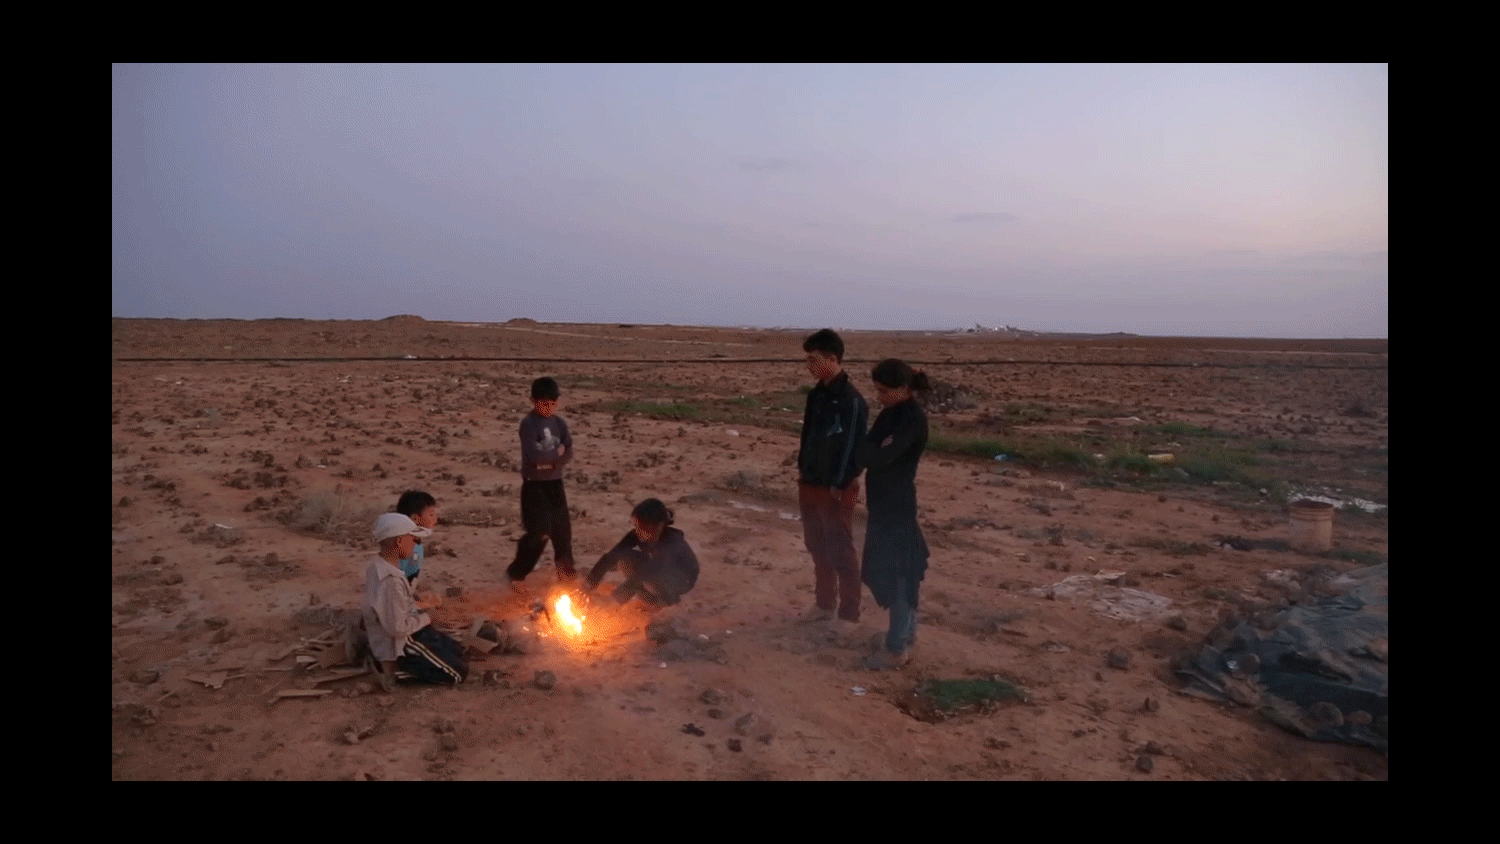  A refugee family gathers with fellow camp residents around a fire at dusk in the desert between the Syrian and Iraqi borders in Ereinbeh, Jordan. 2013 